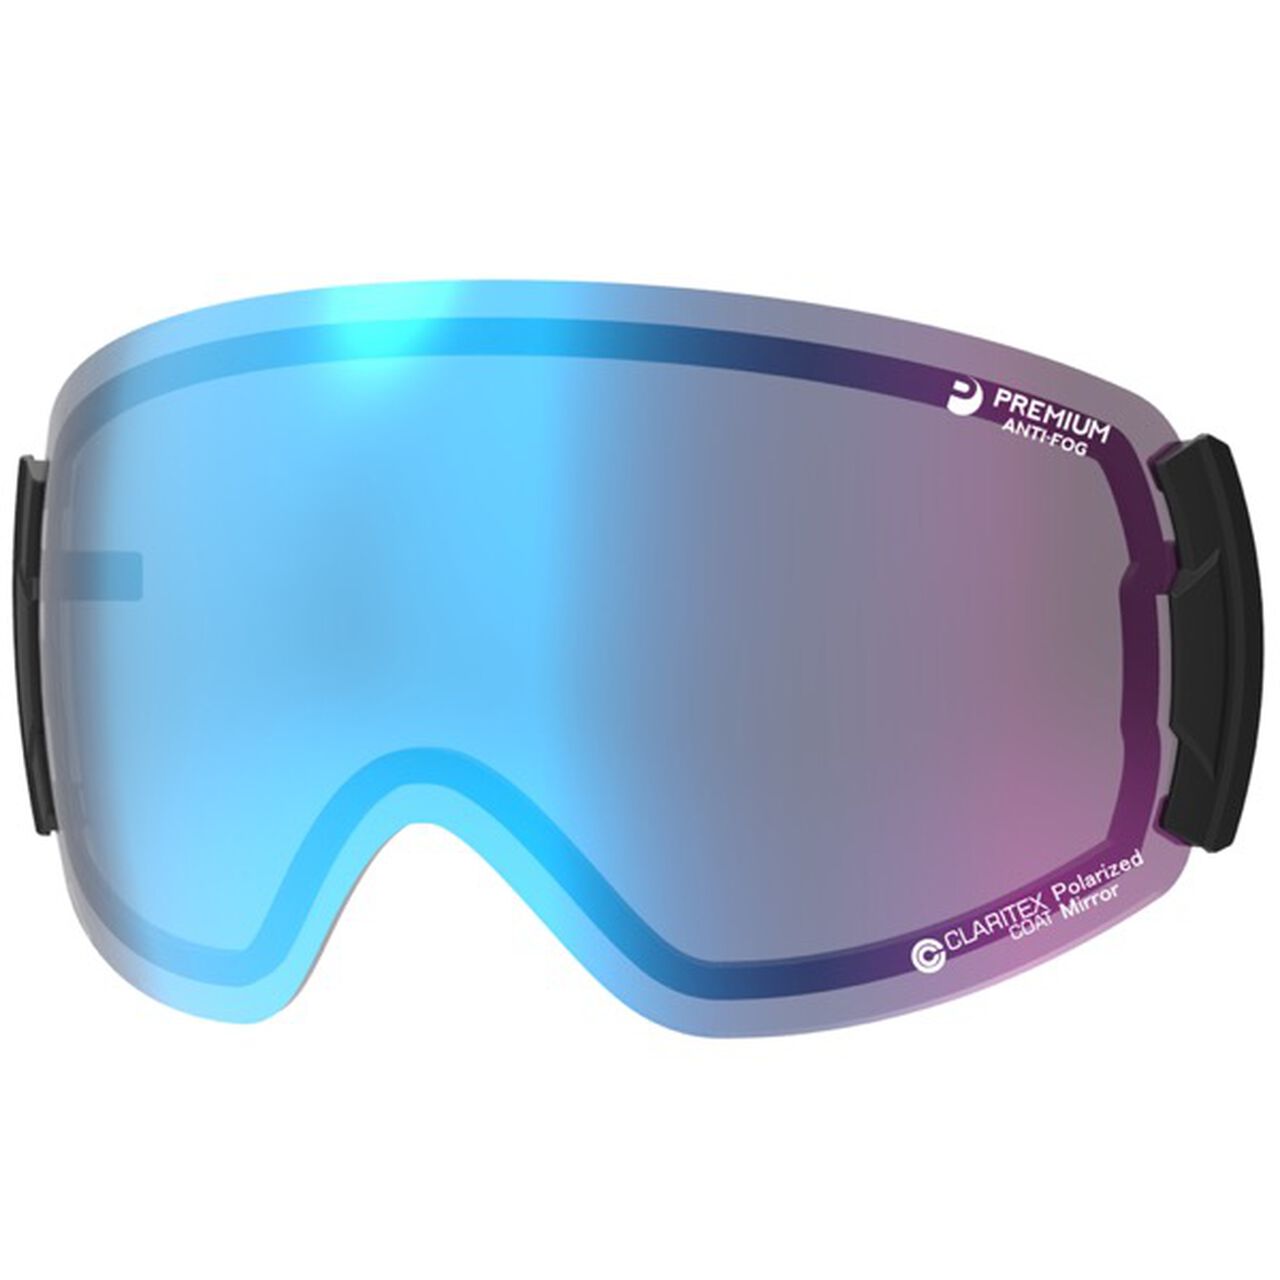 LRV-1155 Pastel blue mirror x Polarized grey for ROVO,Opt9, large image number 0